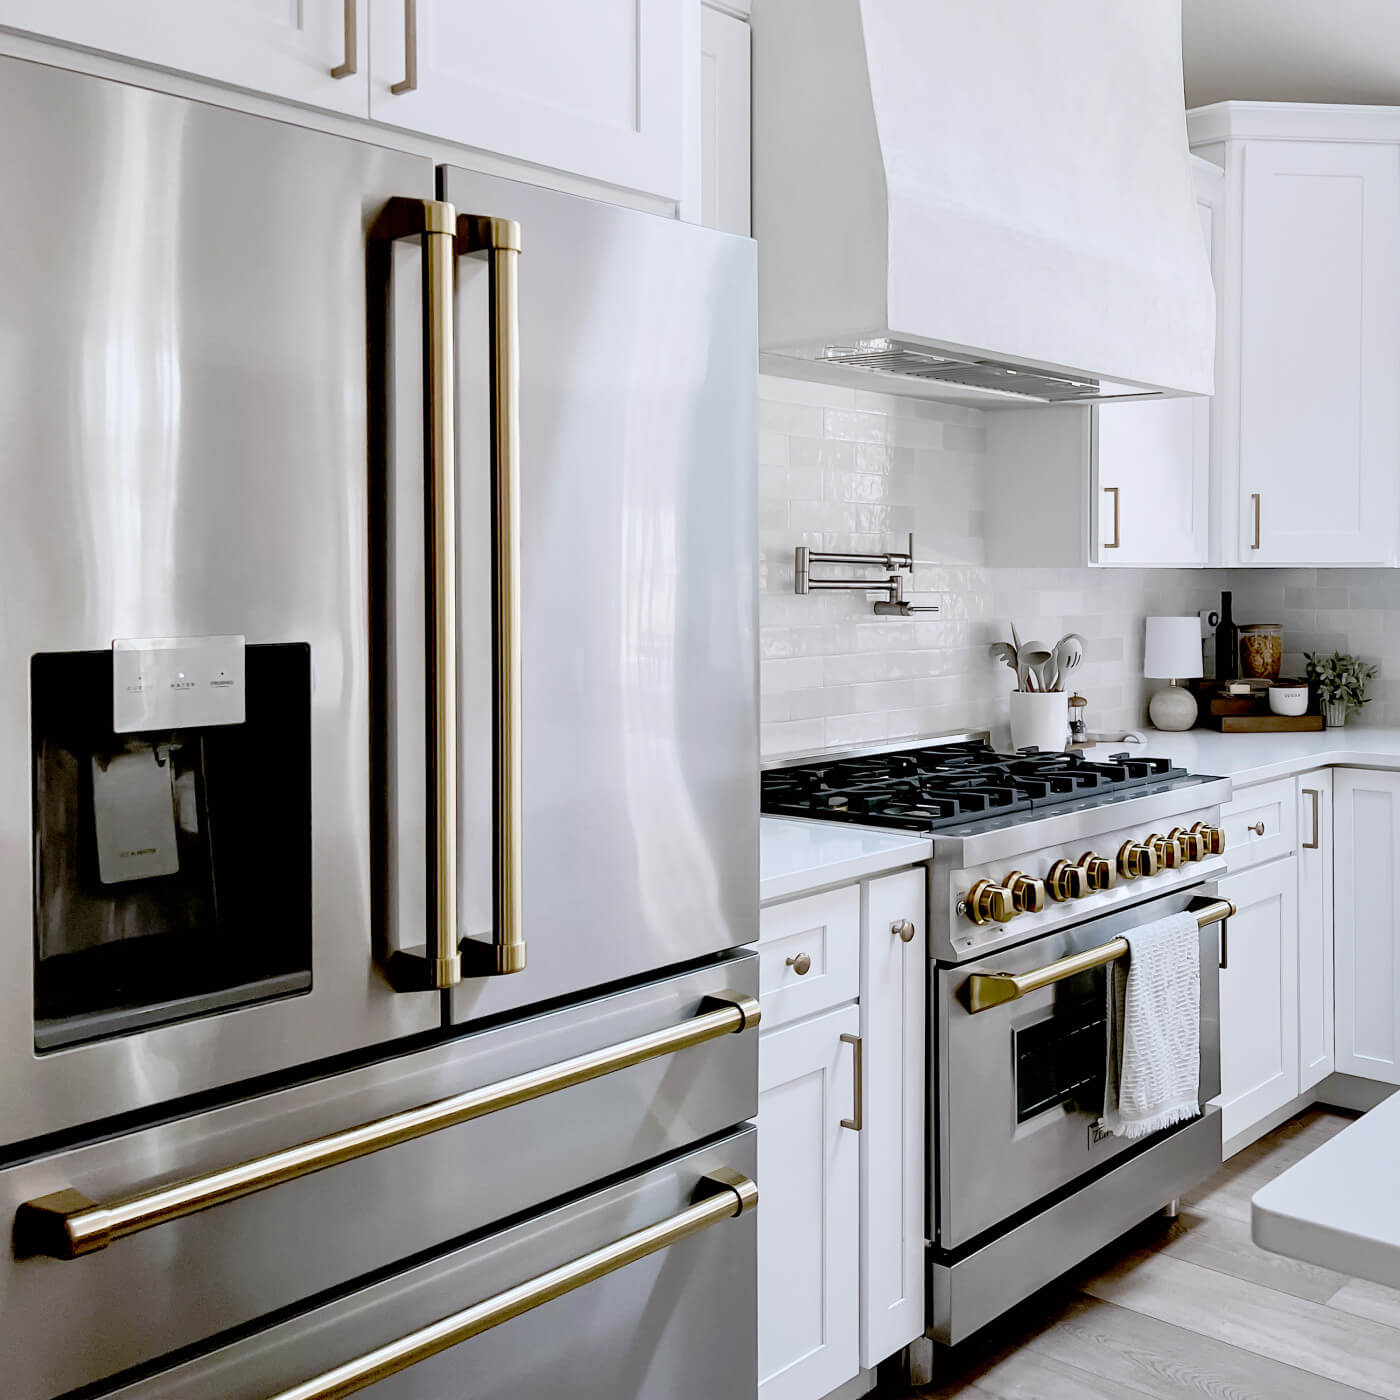 A sleek and modern kitchen interior showcasing a ZLINE 36-inch refrigerator with brass handles alongside a coordinating ZLINE gas range with brass burners, set against white cabinetry and subway tile backsplash, embodying luxury and functionality